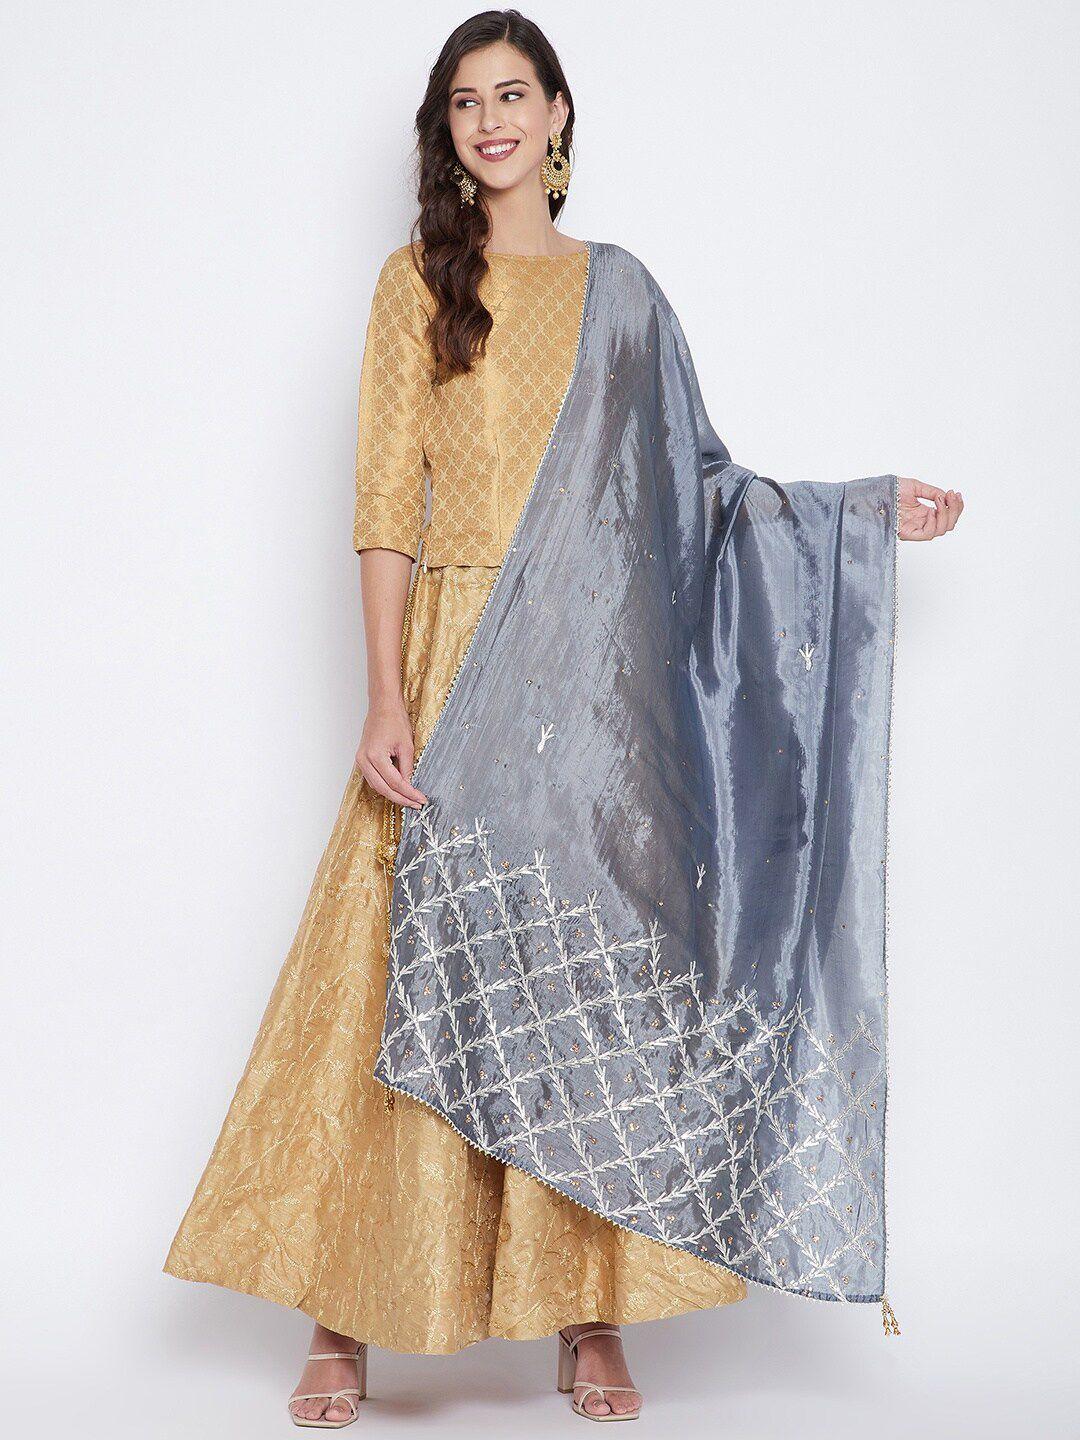 clora creation grey & white embroidered dupatta with sequinned